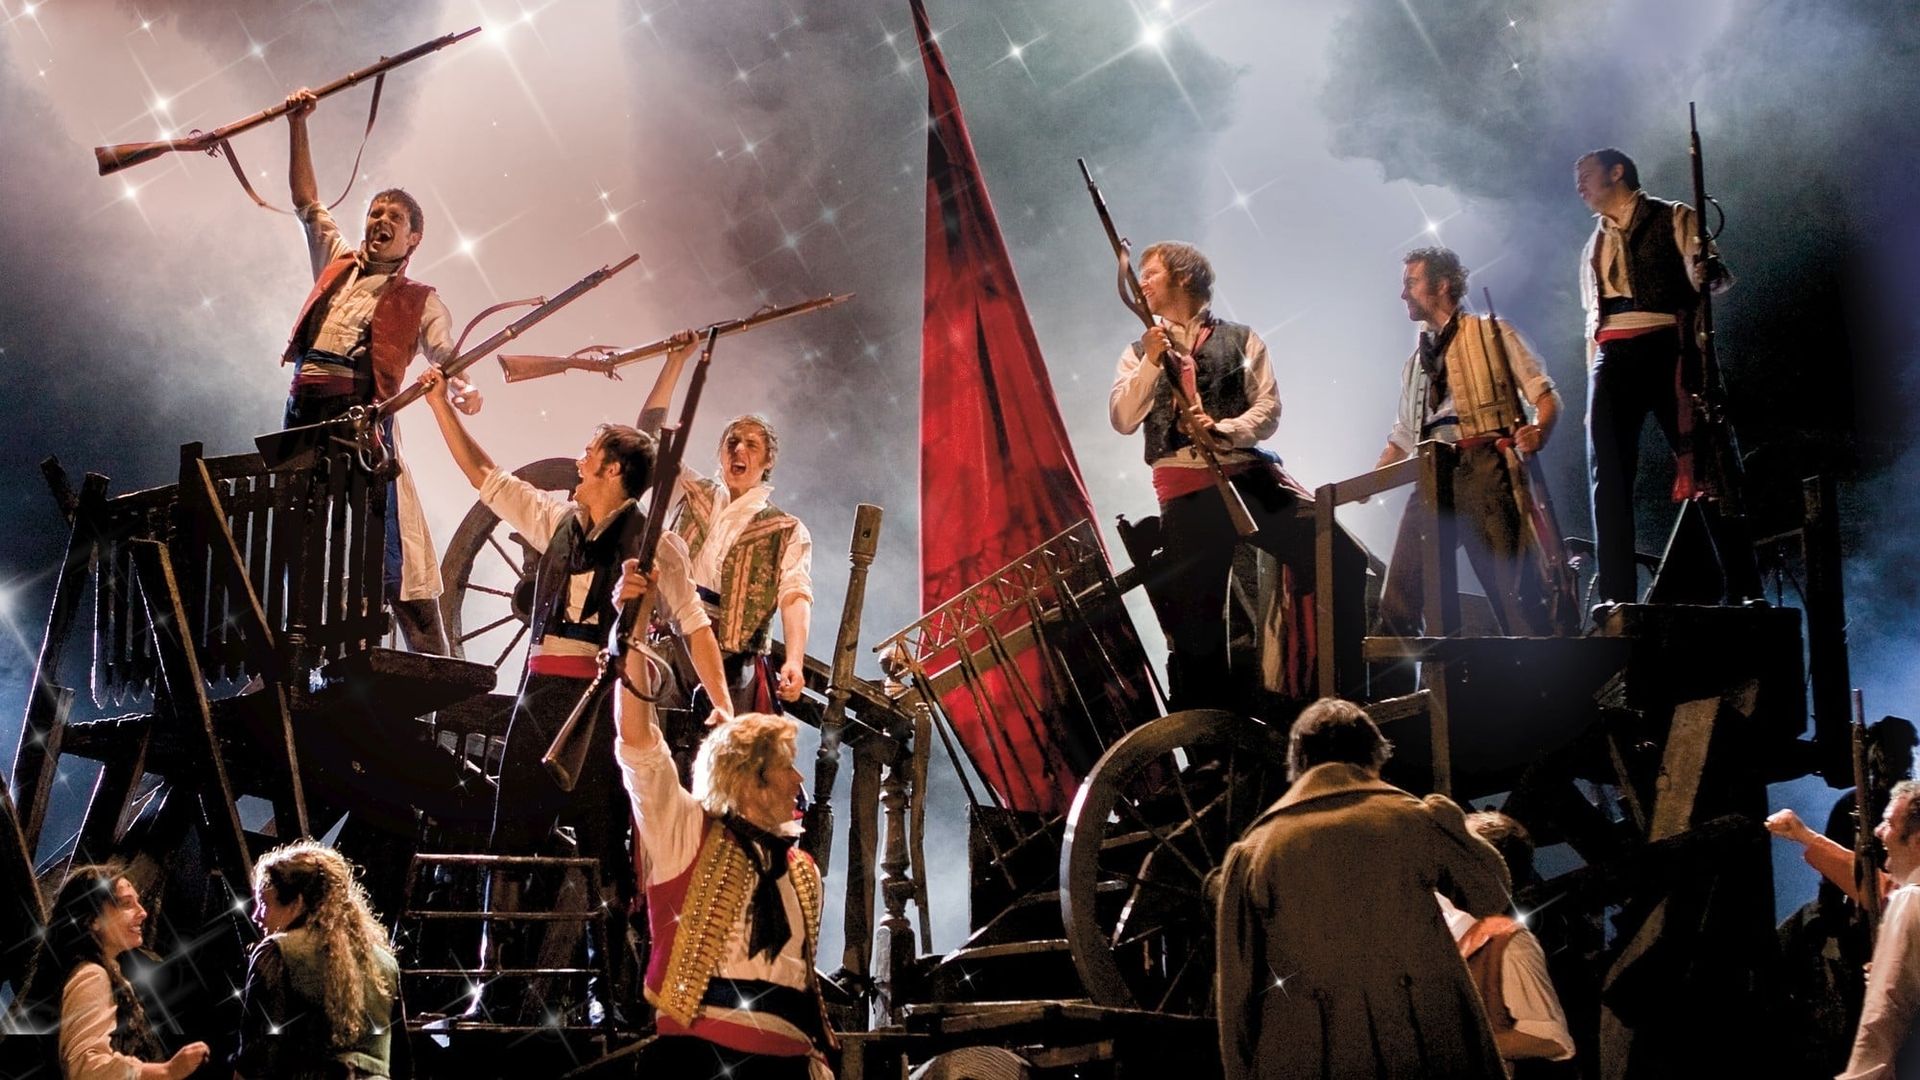 Les Misérables in Concert: The 25th Anniversary background